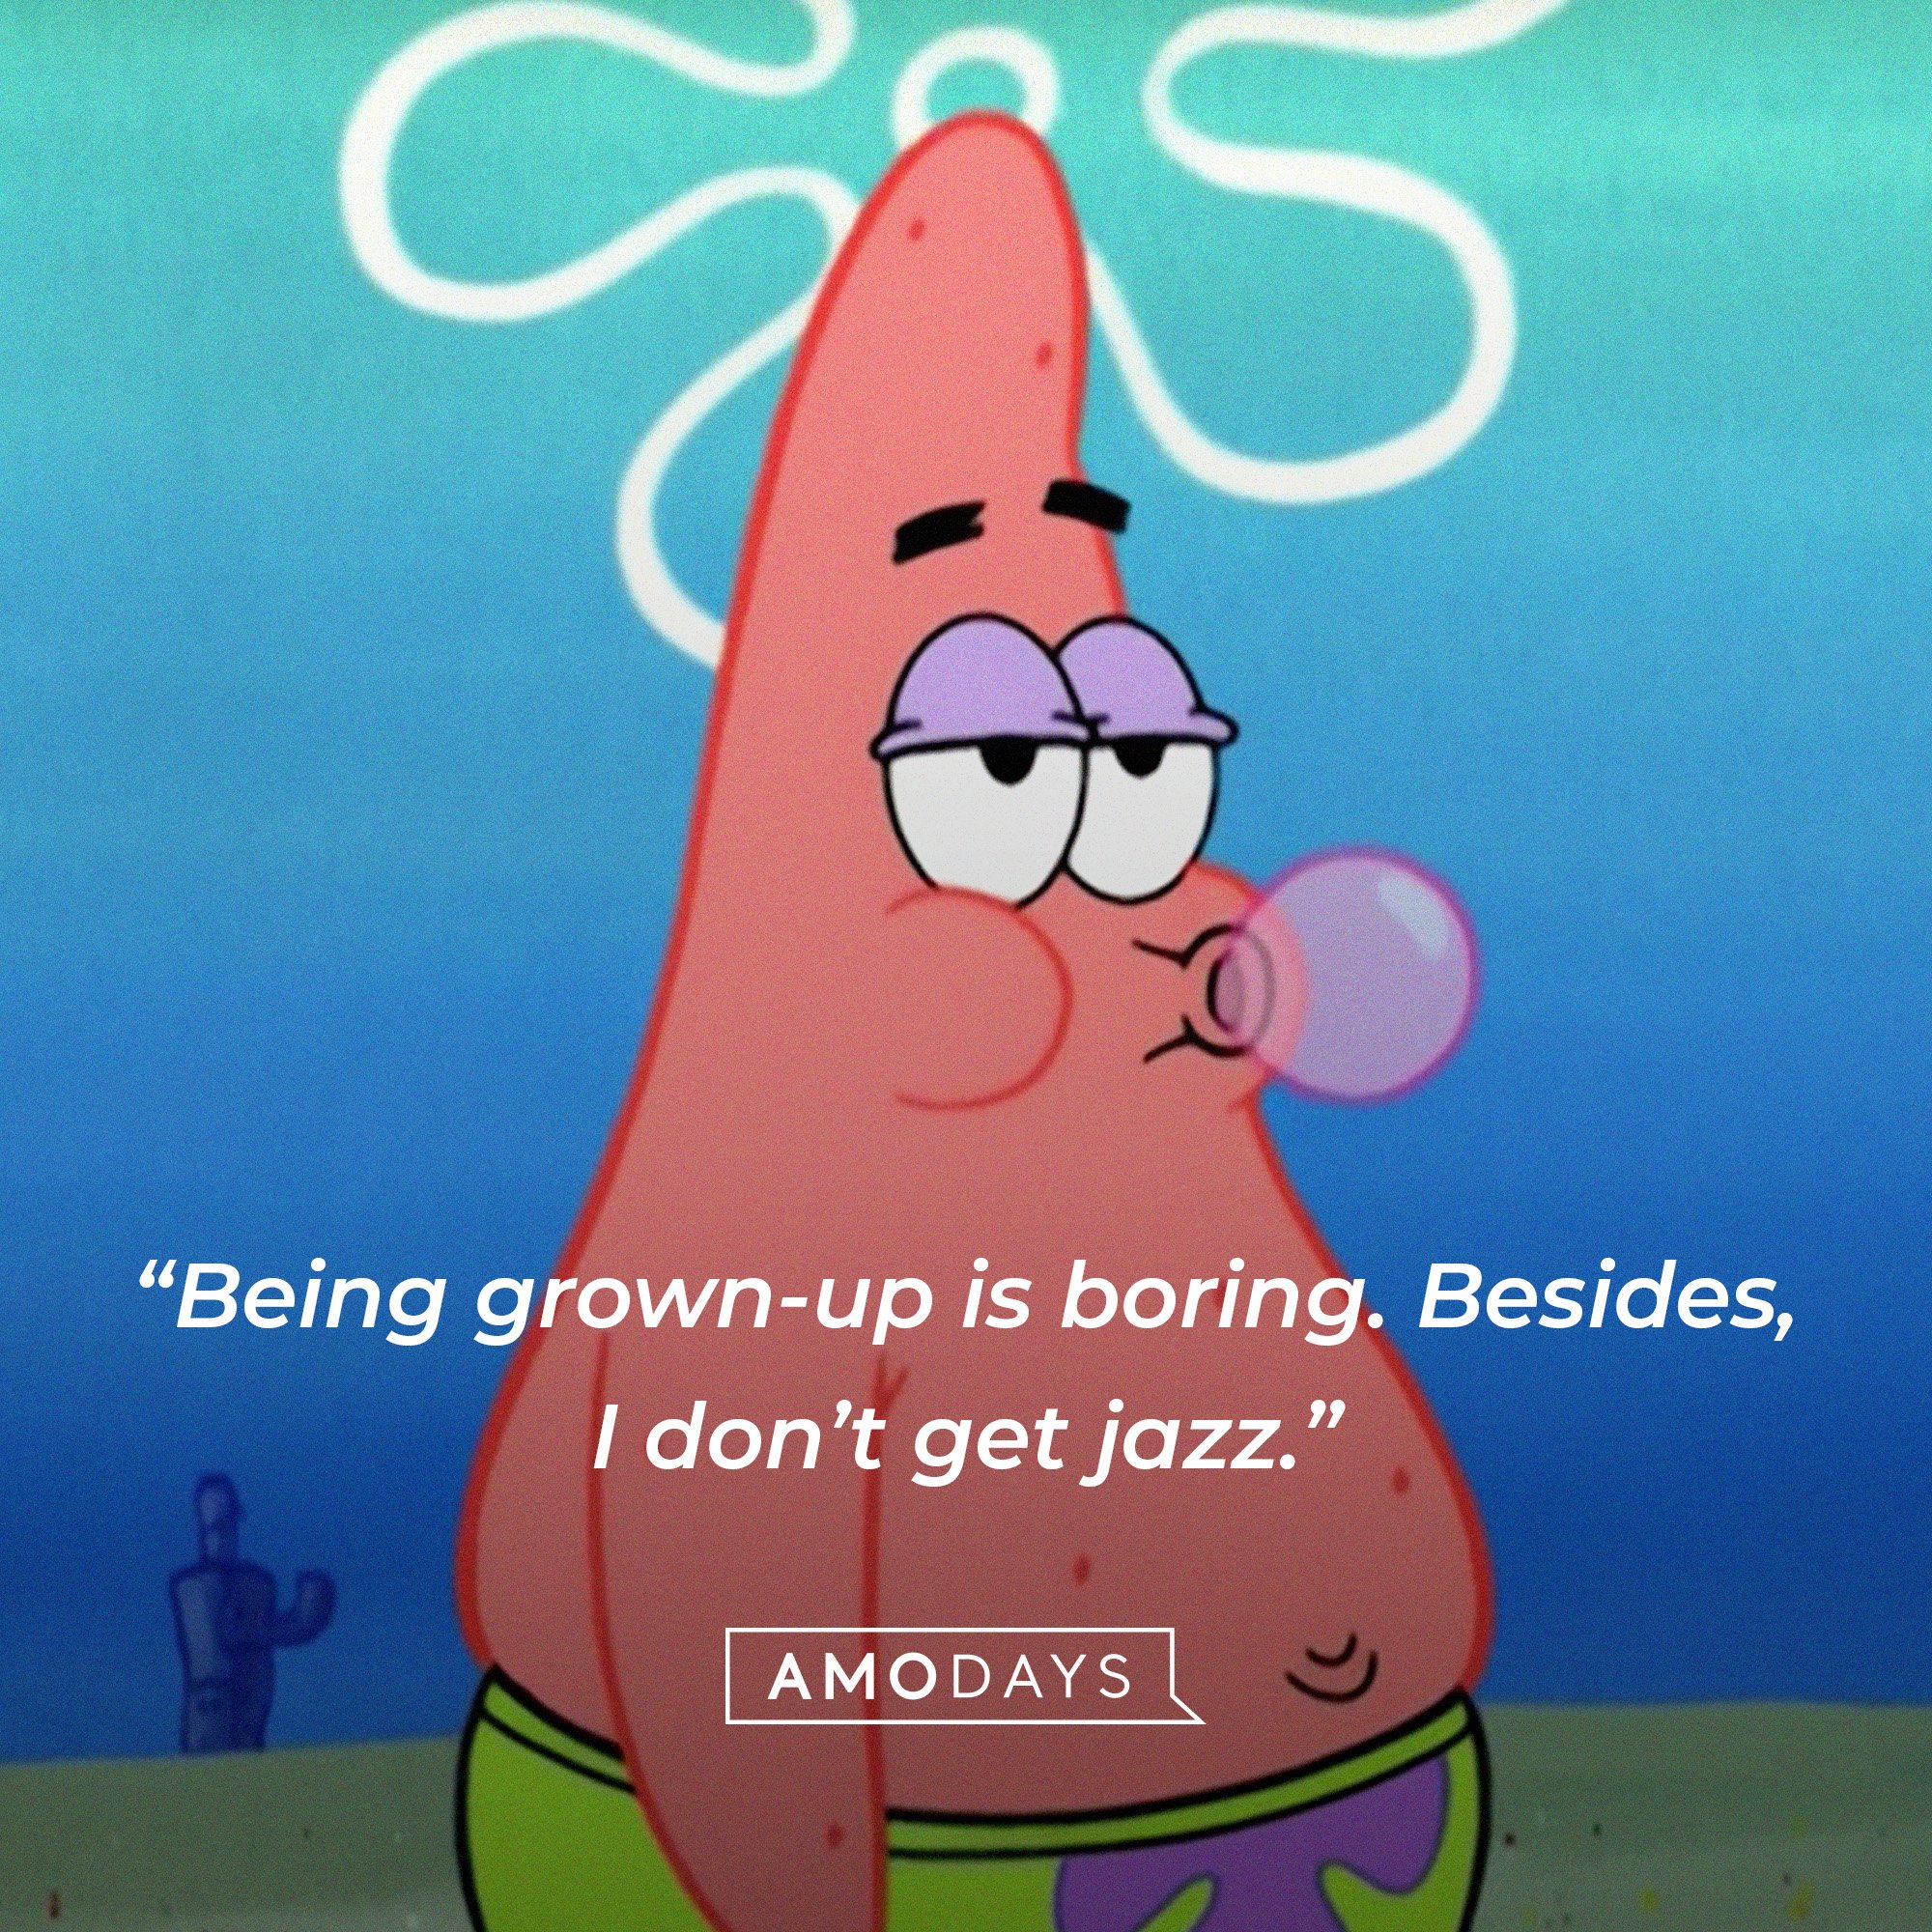 Patrick Star’s quote: “Being grown-up is boring. Besides, I don’t get jazz.” | Image: AmoDays